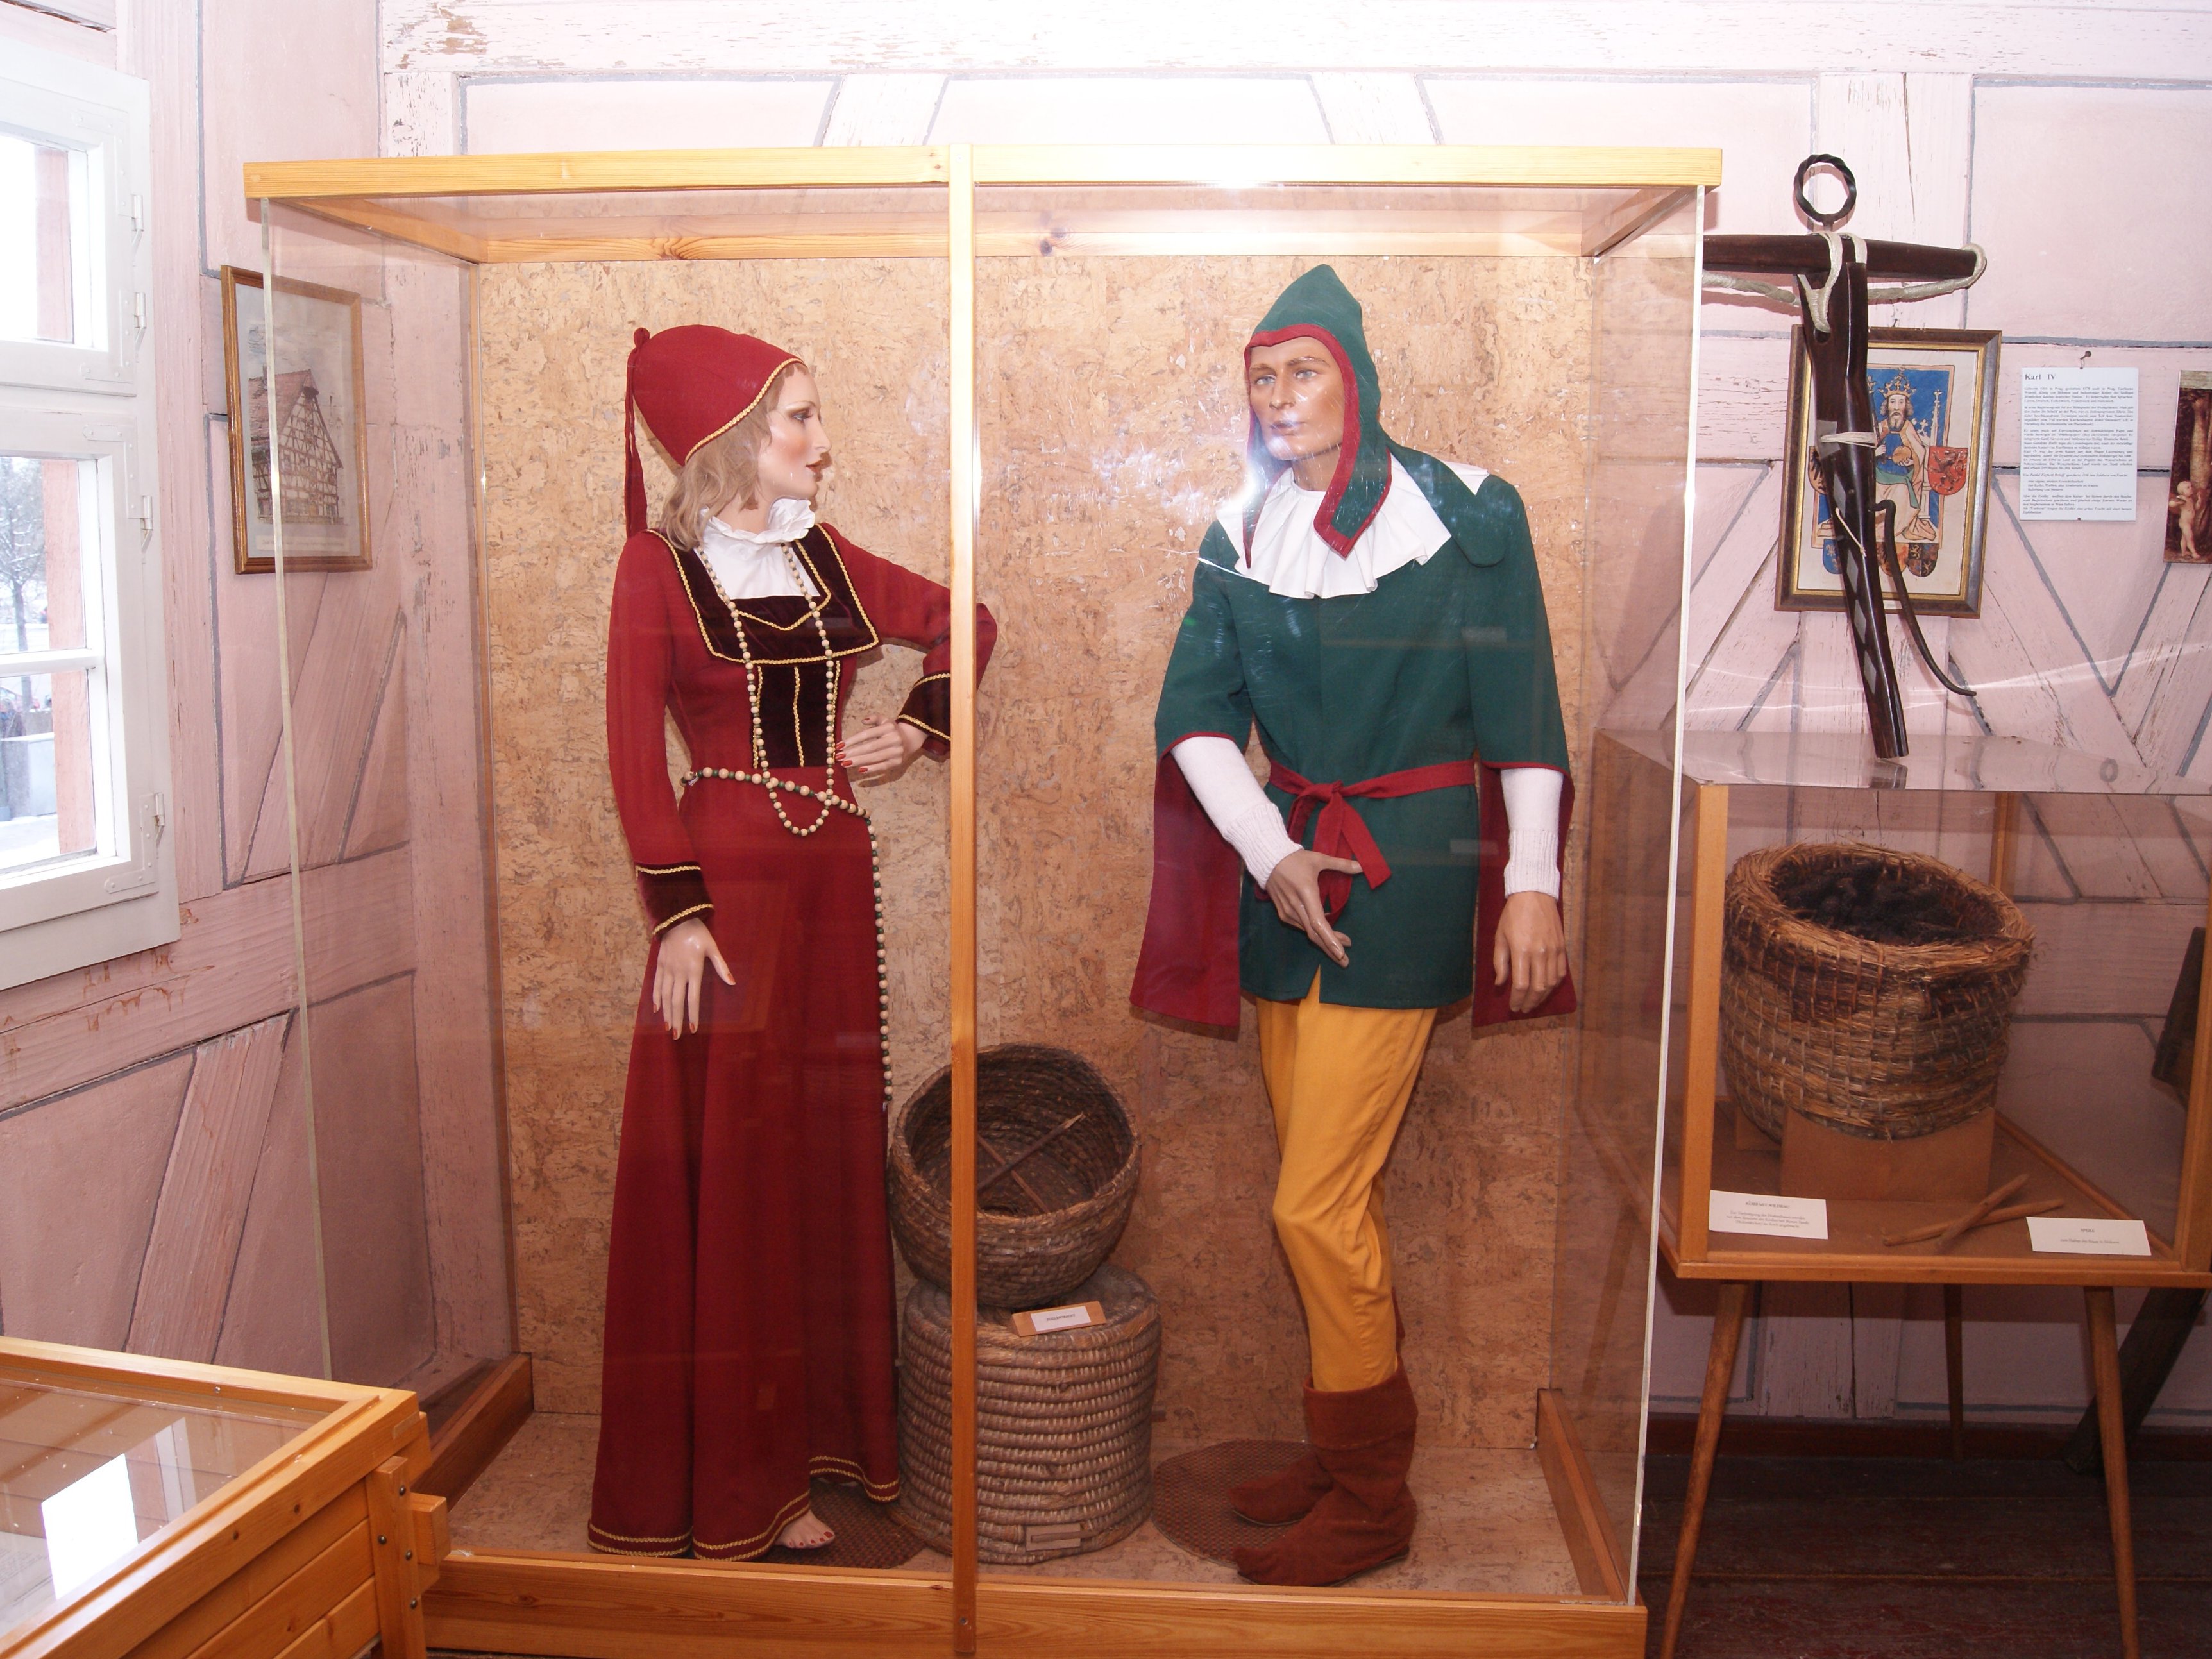 The picture shows the Zeidler costume in red, green and yellow